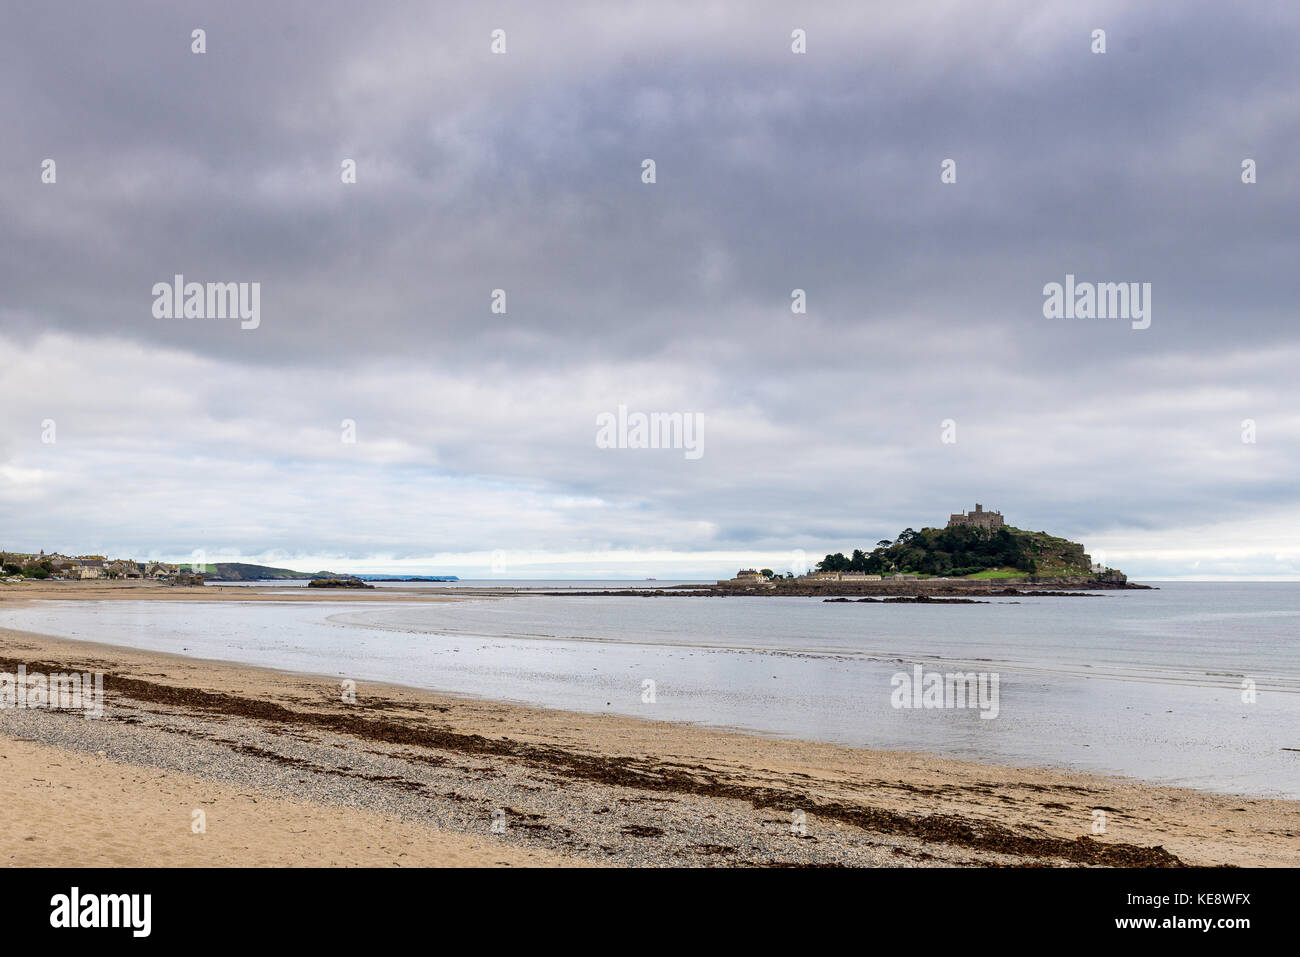 St Michael's Mount sits in Mount Bay, connected to Marazion via a causeway accessible during lower tides. Stock Photo